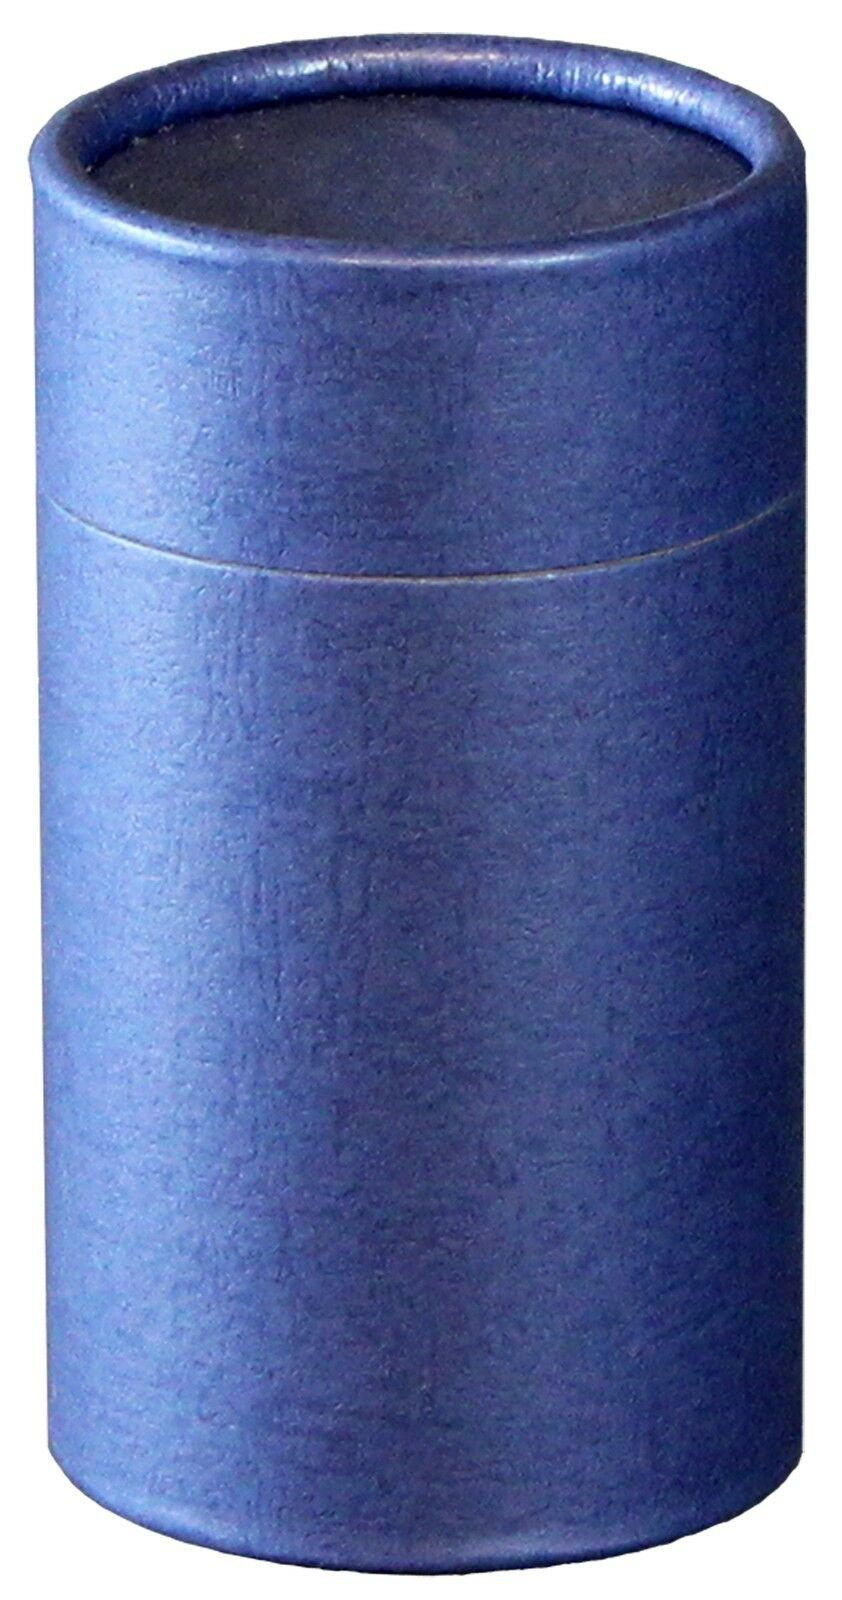 Biodegradable Ash Scattering Tube Cremation Urn - 20 cubic inches